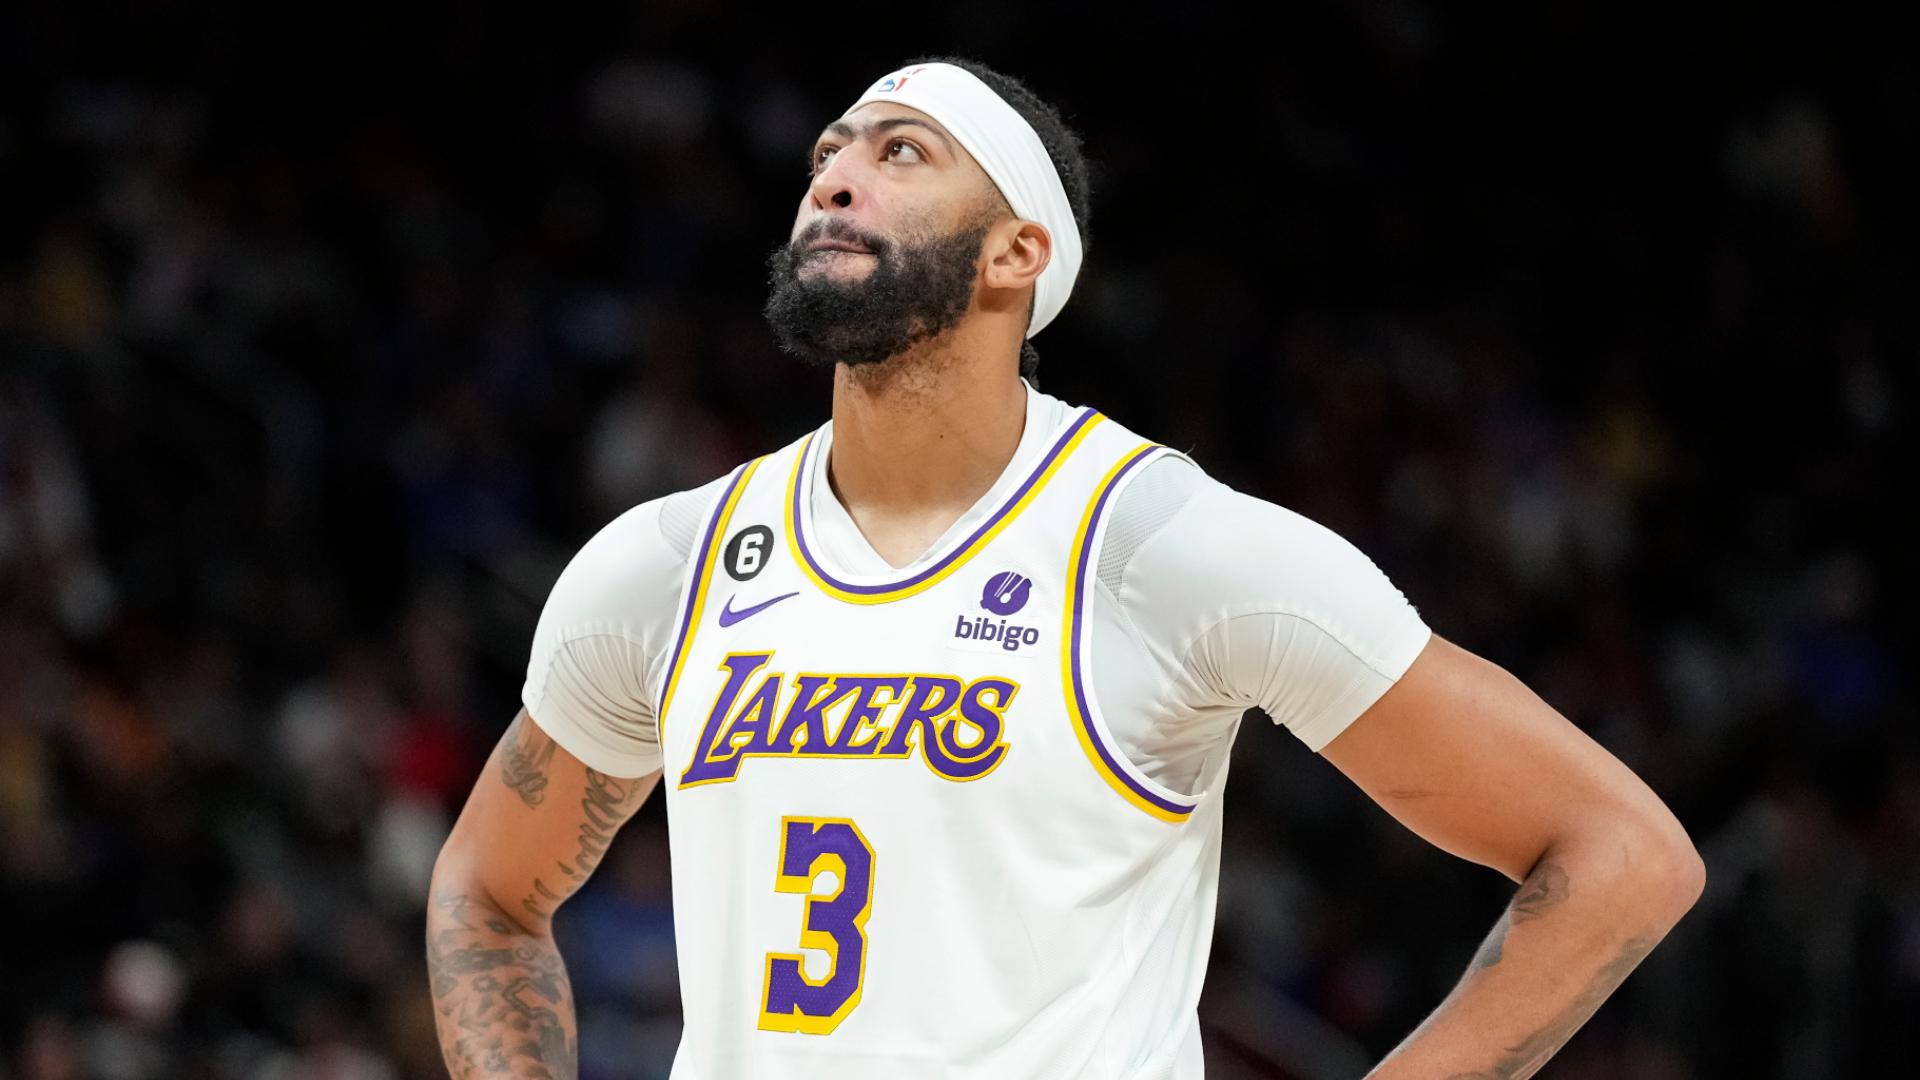 NBA News:Los Angeles Lakers' Big 3 Puts NBA on Notice- Why Their Surge Could End in Championship Glory